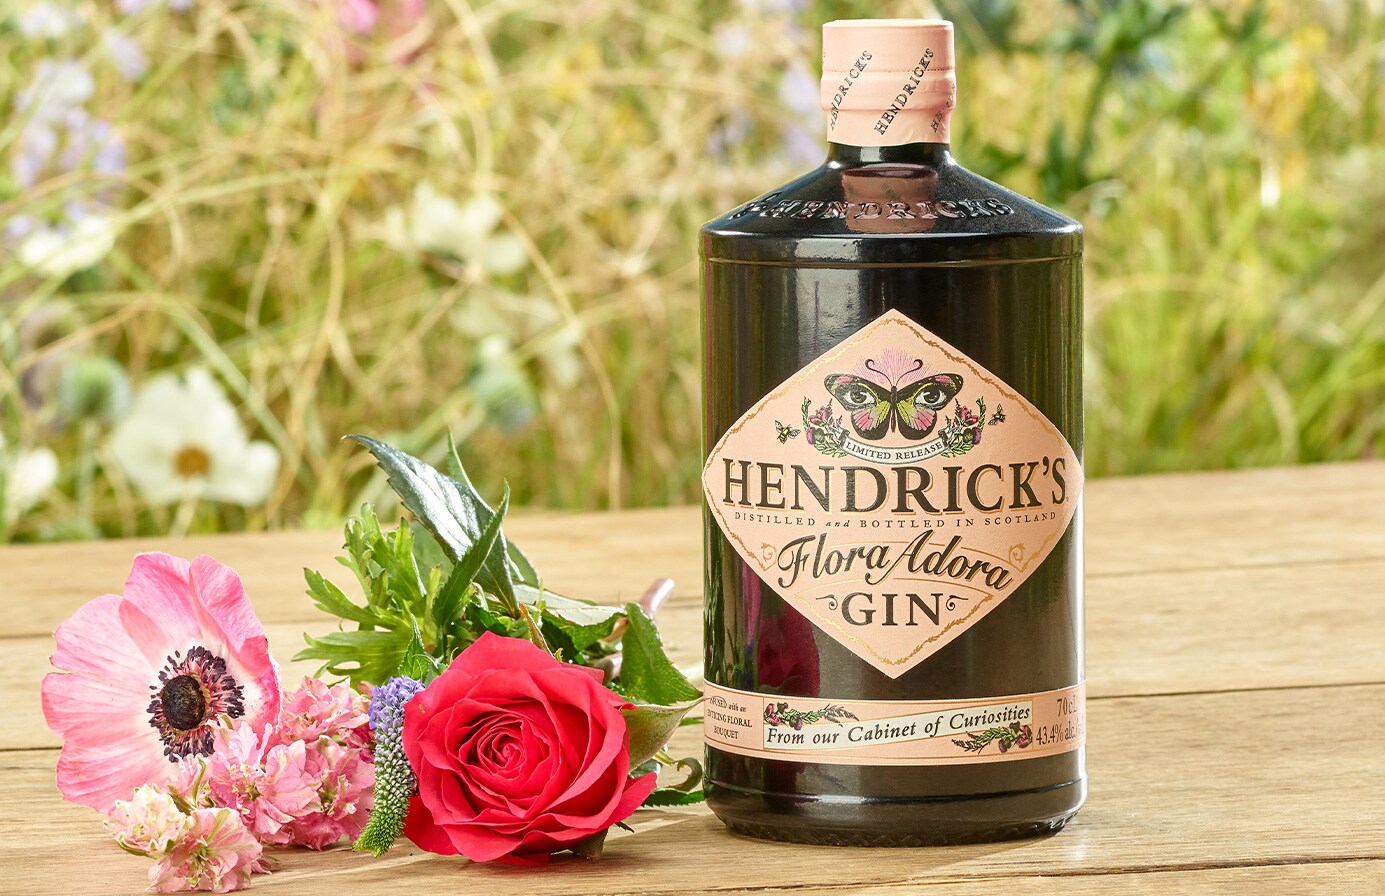 Hendricks - Discover the latest limited release from Hendrick’s Gin’s Cabinet of Curiosities – Hendrick’s FLORA ADORA.